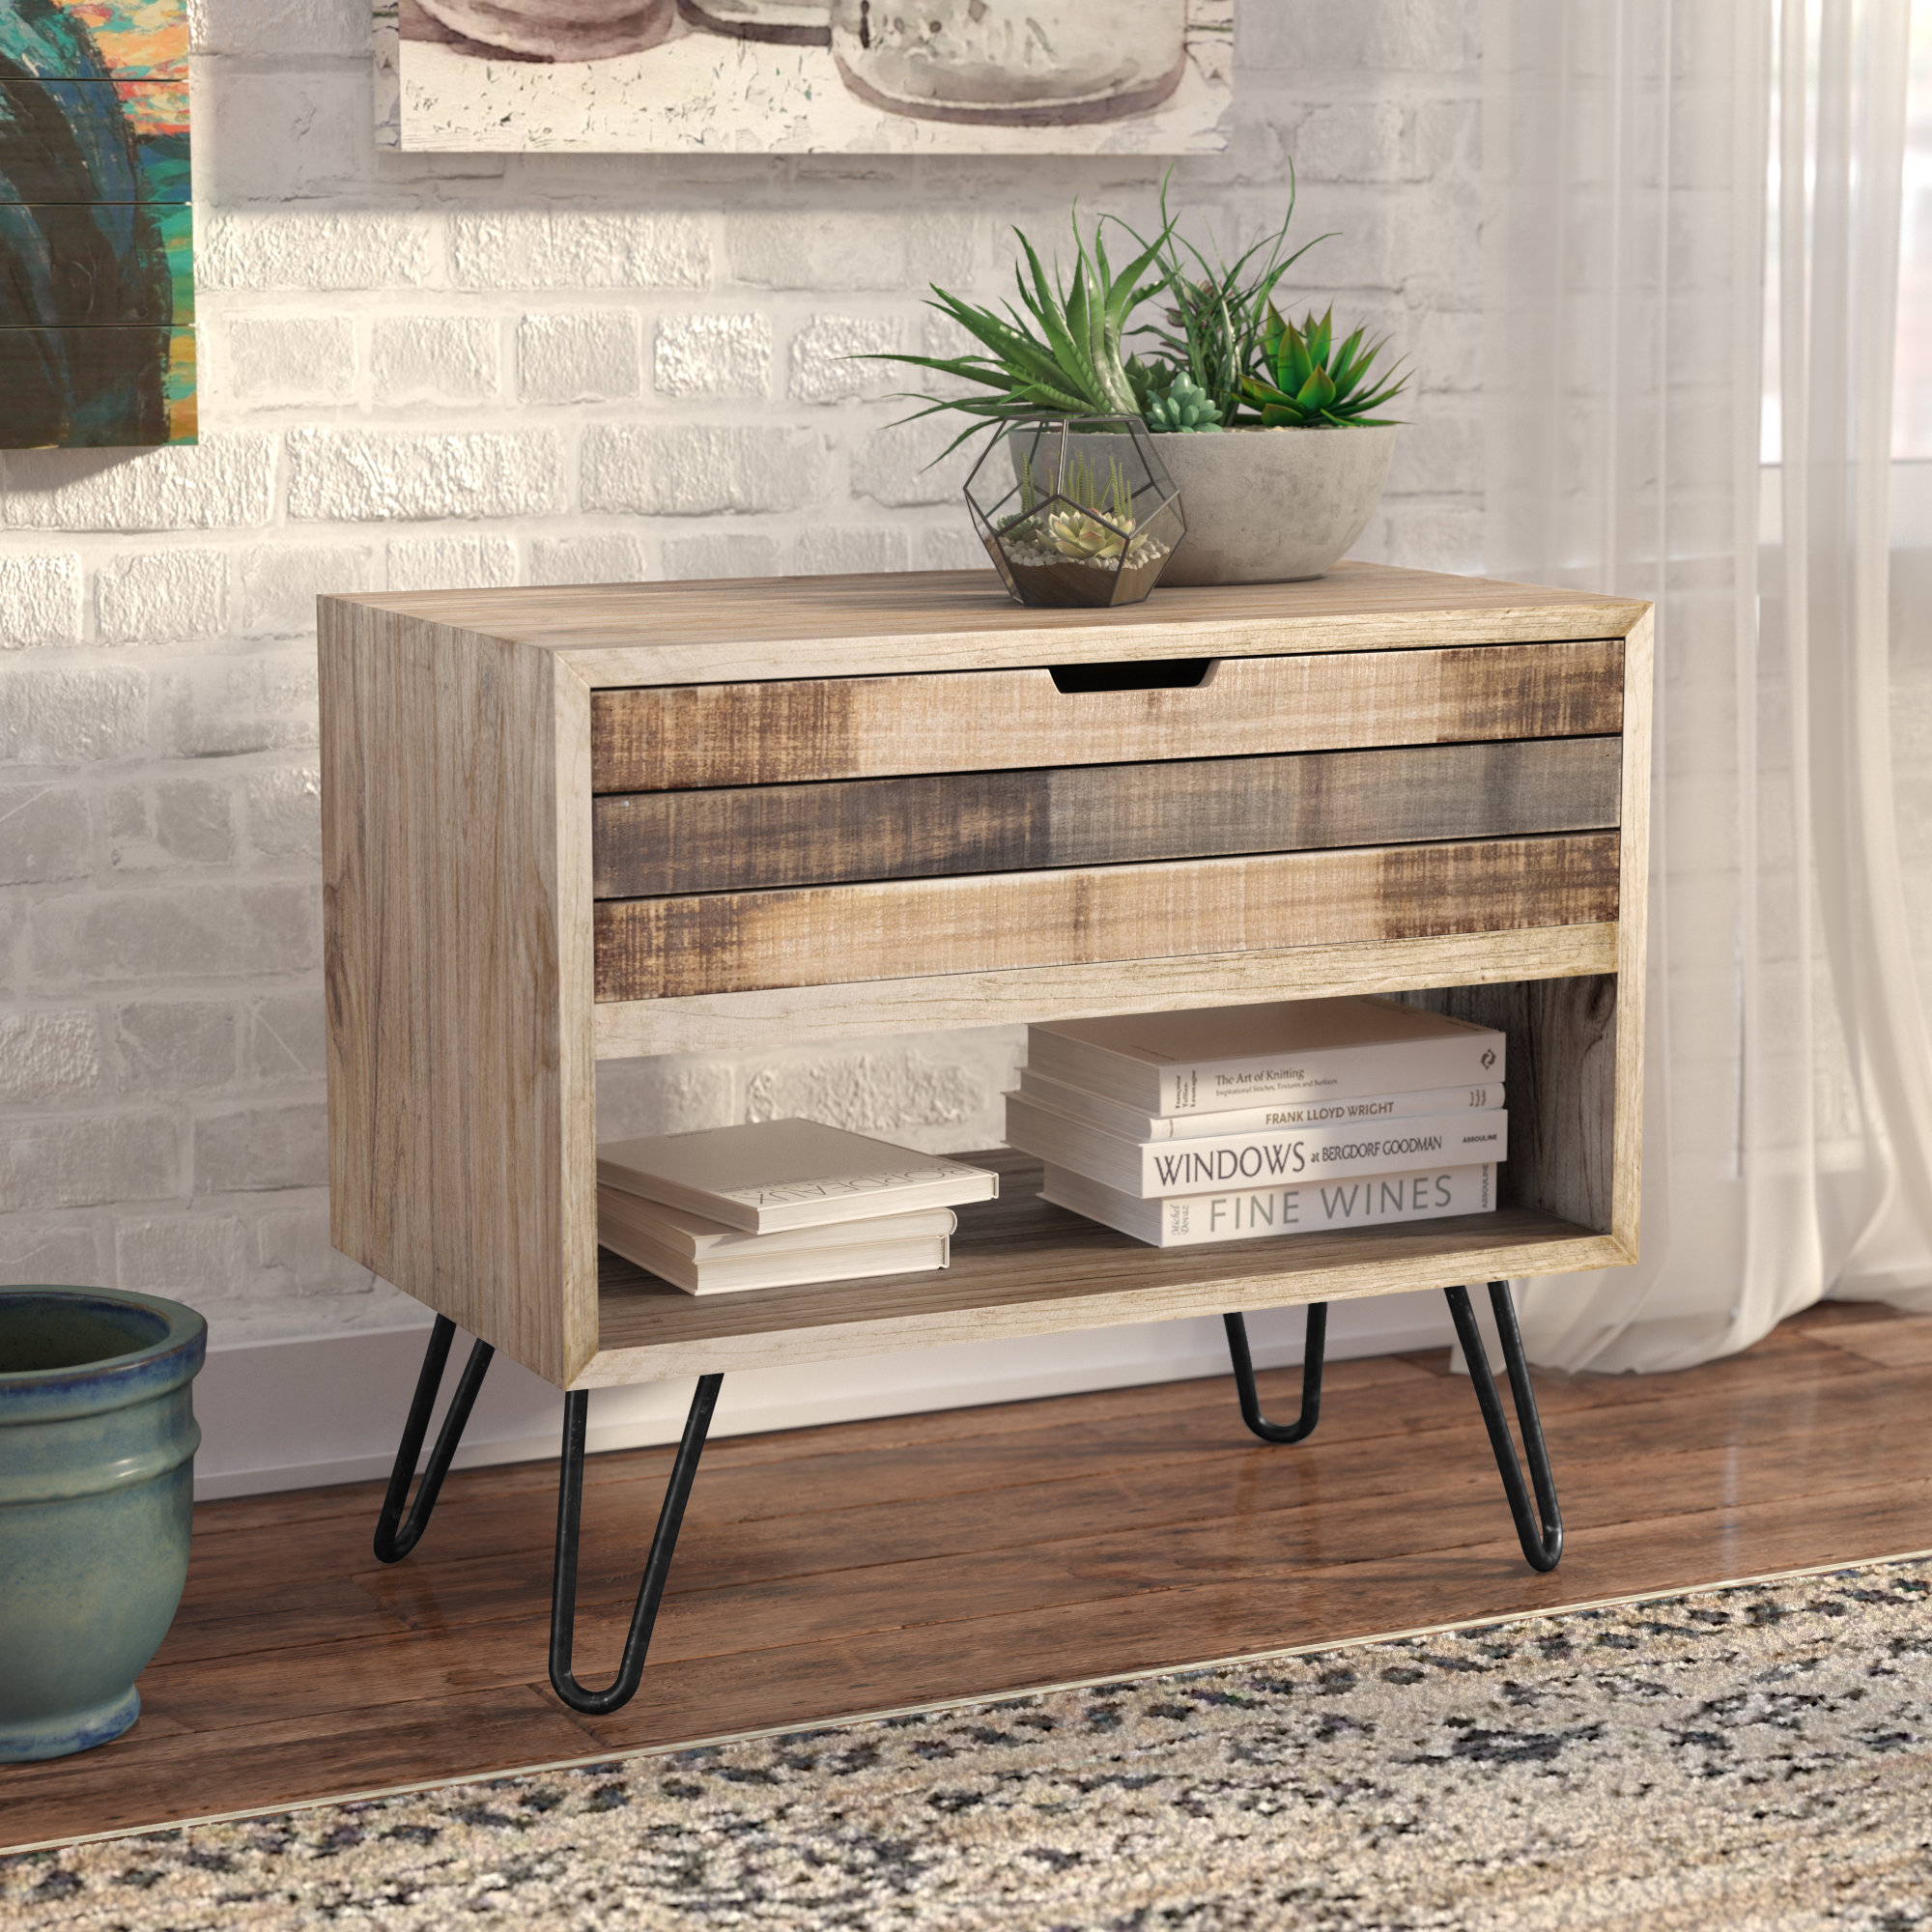 laurel foundry modern farmhouse maddock end table reviews twisted mango wood accent parsons coffee nesting nightstand outdoor inexpensive nightstands battery lamps corner cabinet